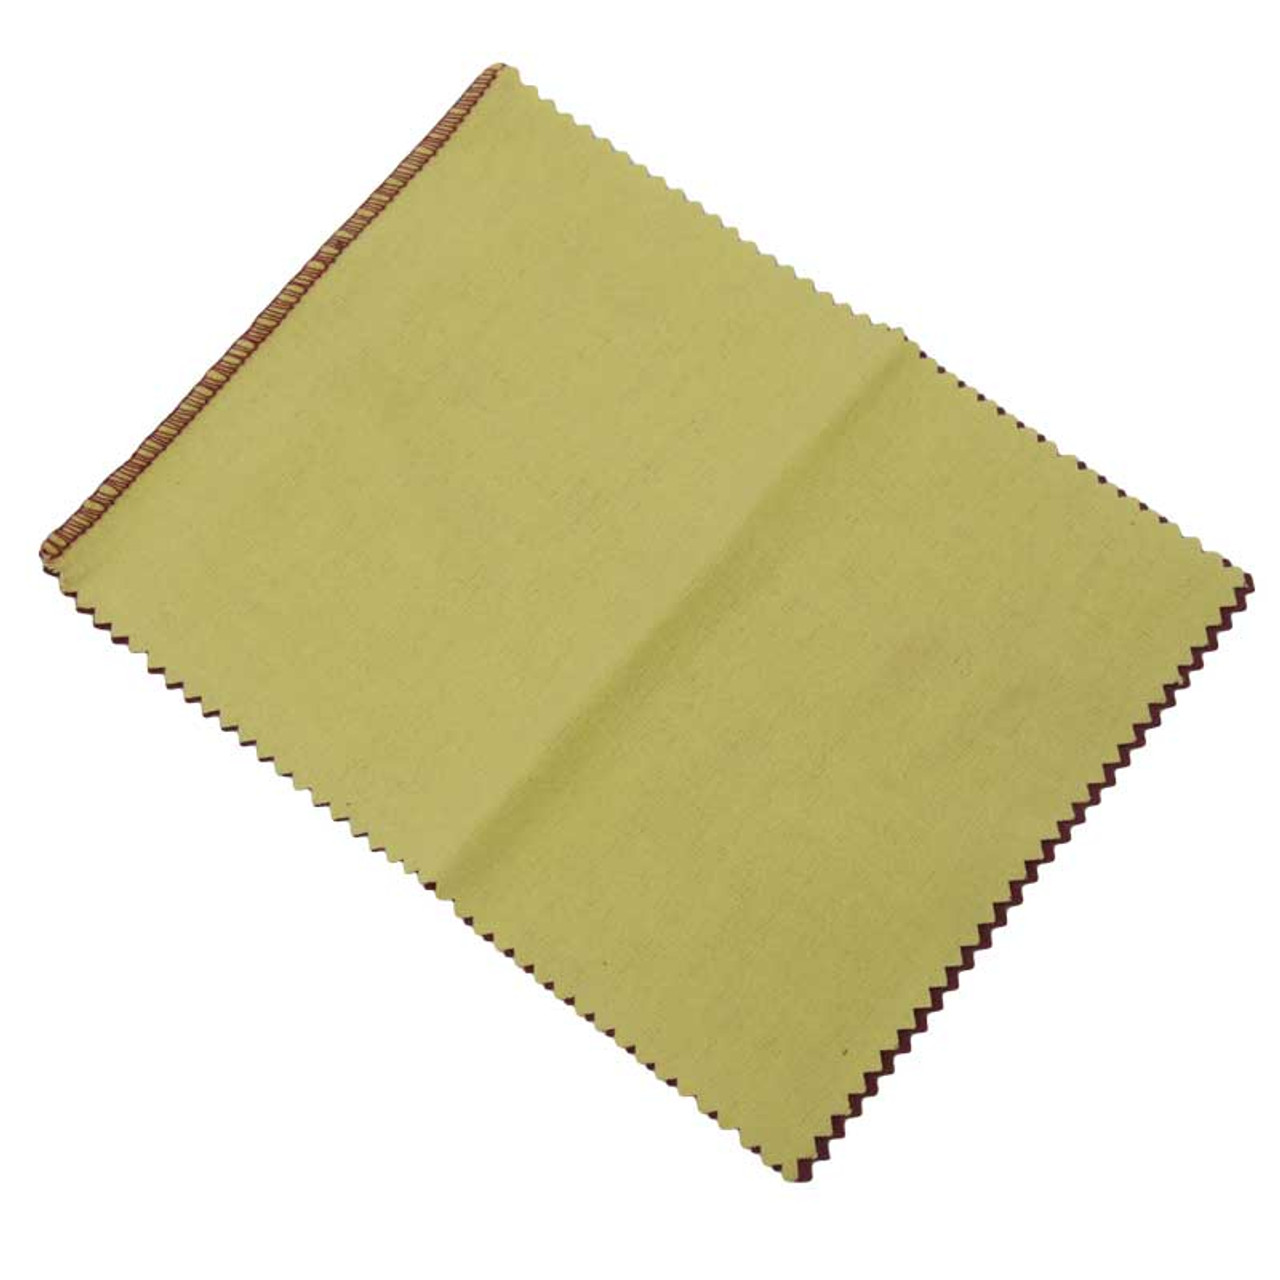 Fabulustre Jewelry Polishing Cloth with Rouge and Buff 9 x 11 inch Sold per Piece | Esslinger